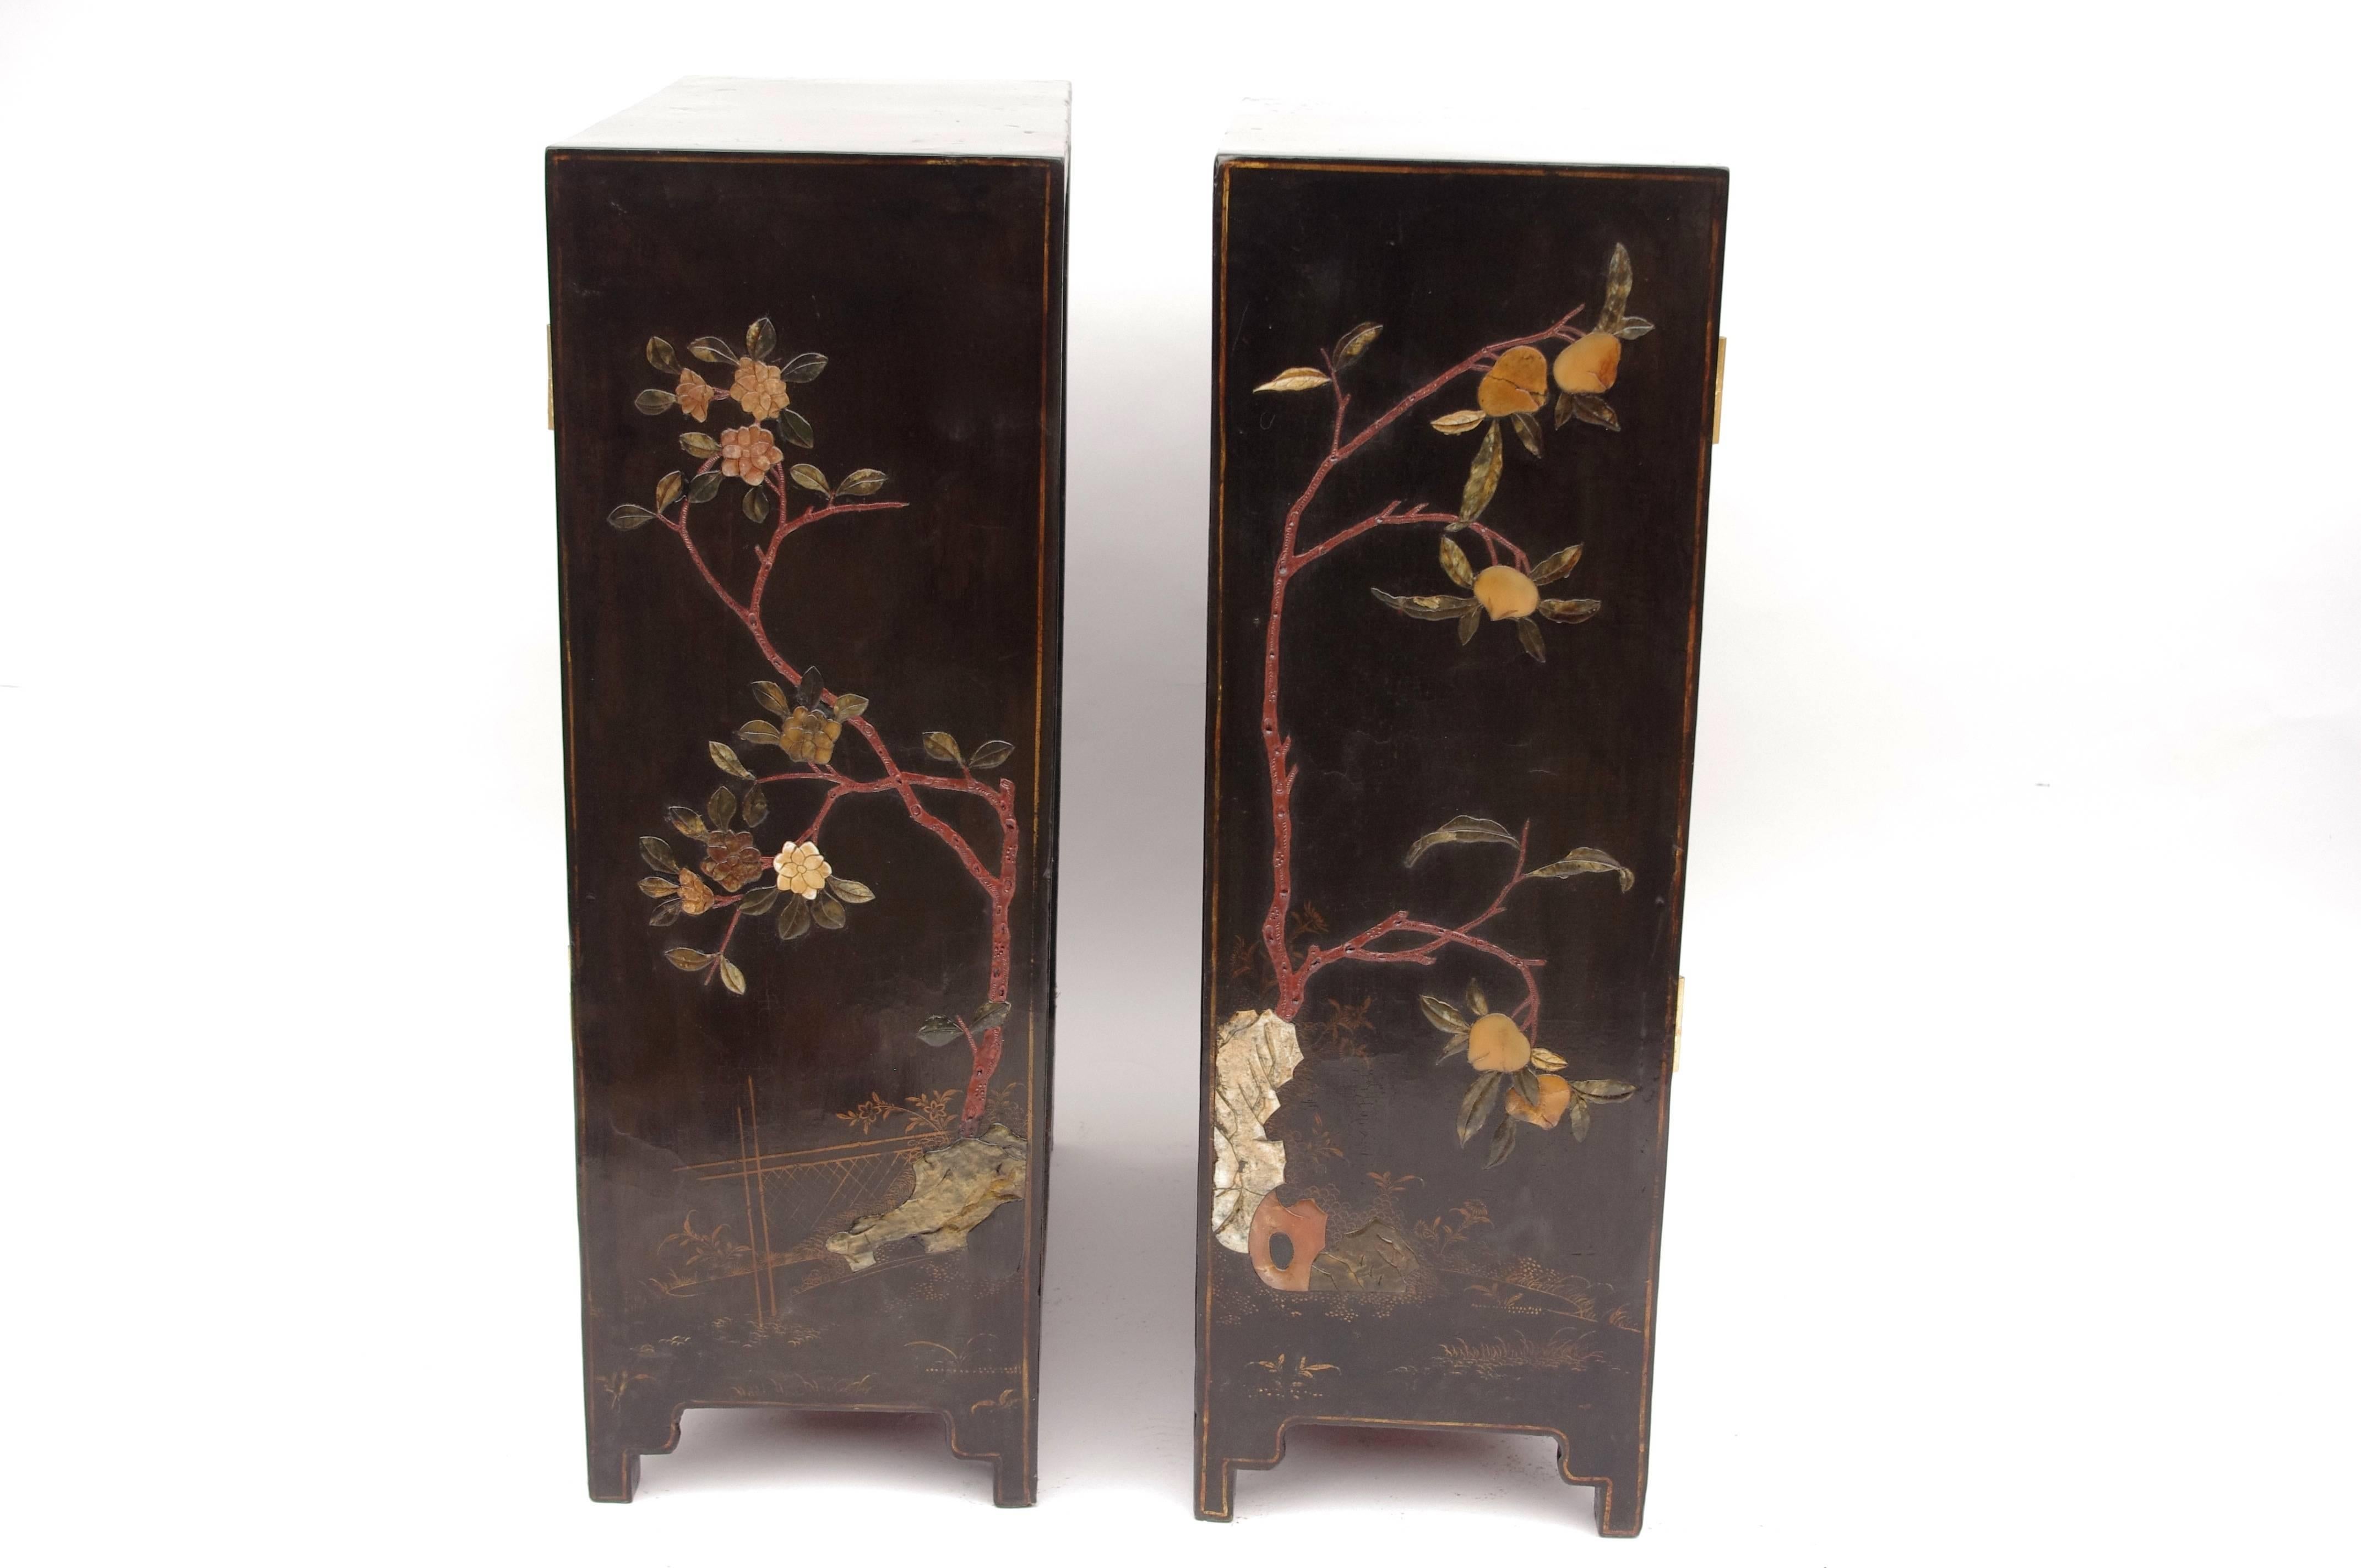 20th Century Pair of Lacquered Nightstands with Hard Stones Inlays, circa 1900